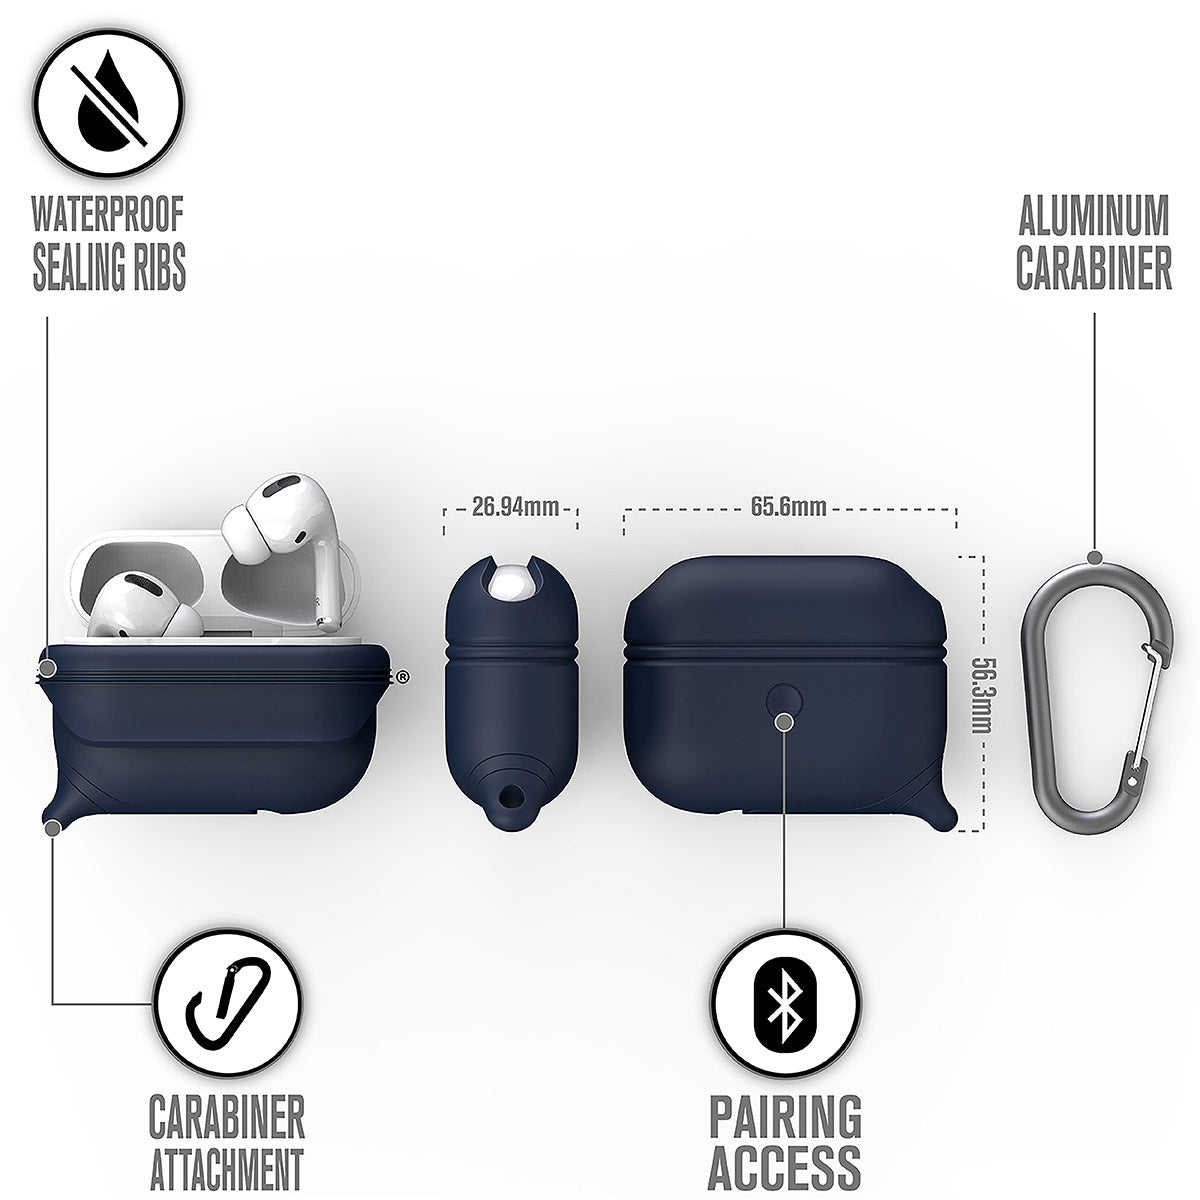 CATAPLAPDPRONAV | catalyst airpods pro gen 2 1 waterproof case carabiner special edition blue different views showing the sealing ribs carabiner attachment loop and pairing access text reads waterproof sealing ribs aluminum carabiner carabiner attachment pairing access